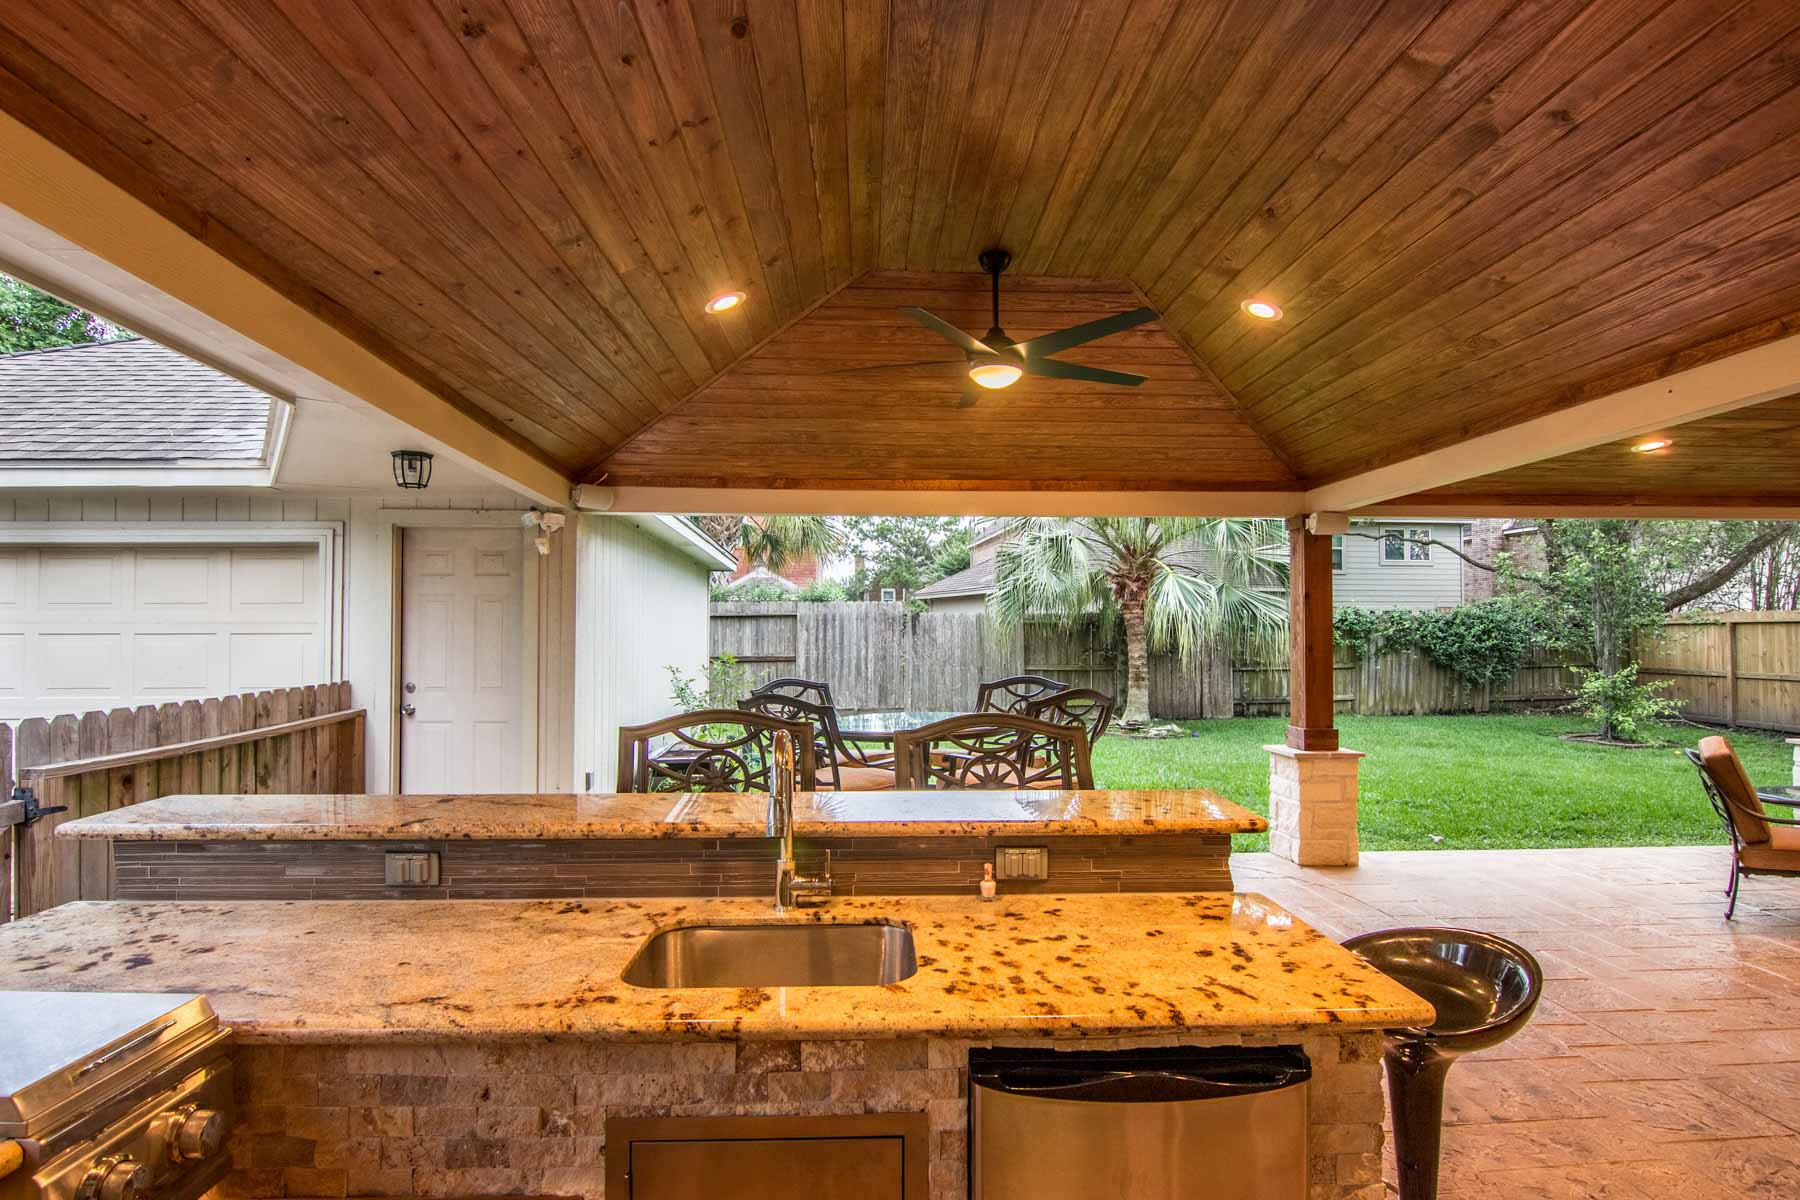 Outdoor Kitchen And Patio
 Outdoor Kitchens HHI Patio Covers Houston